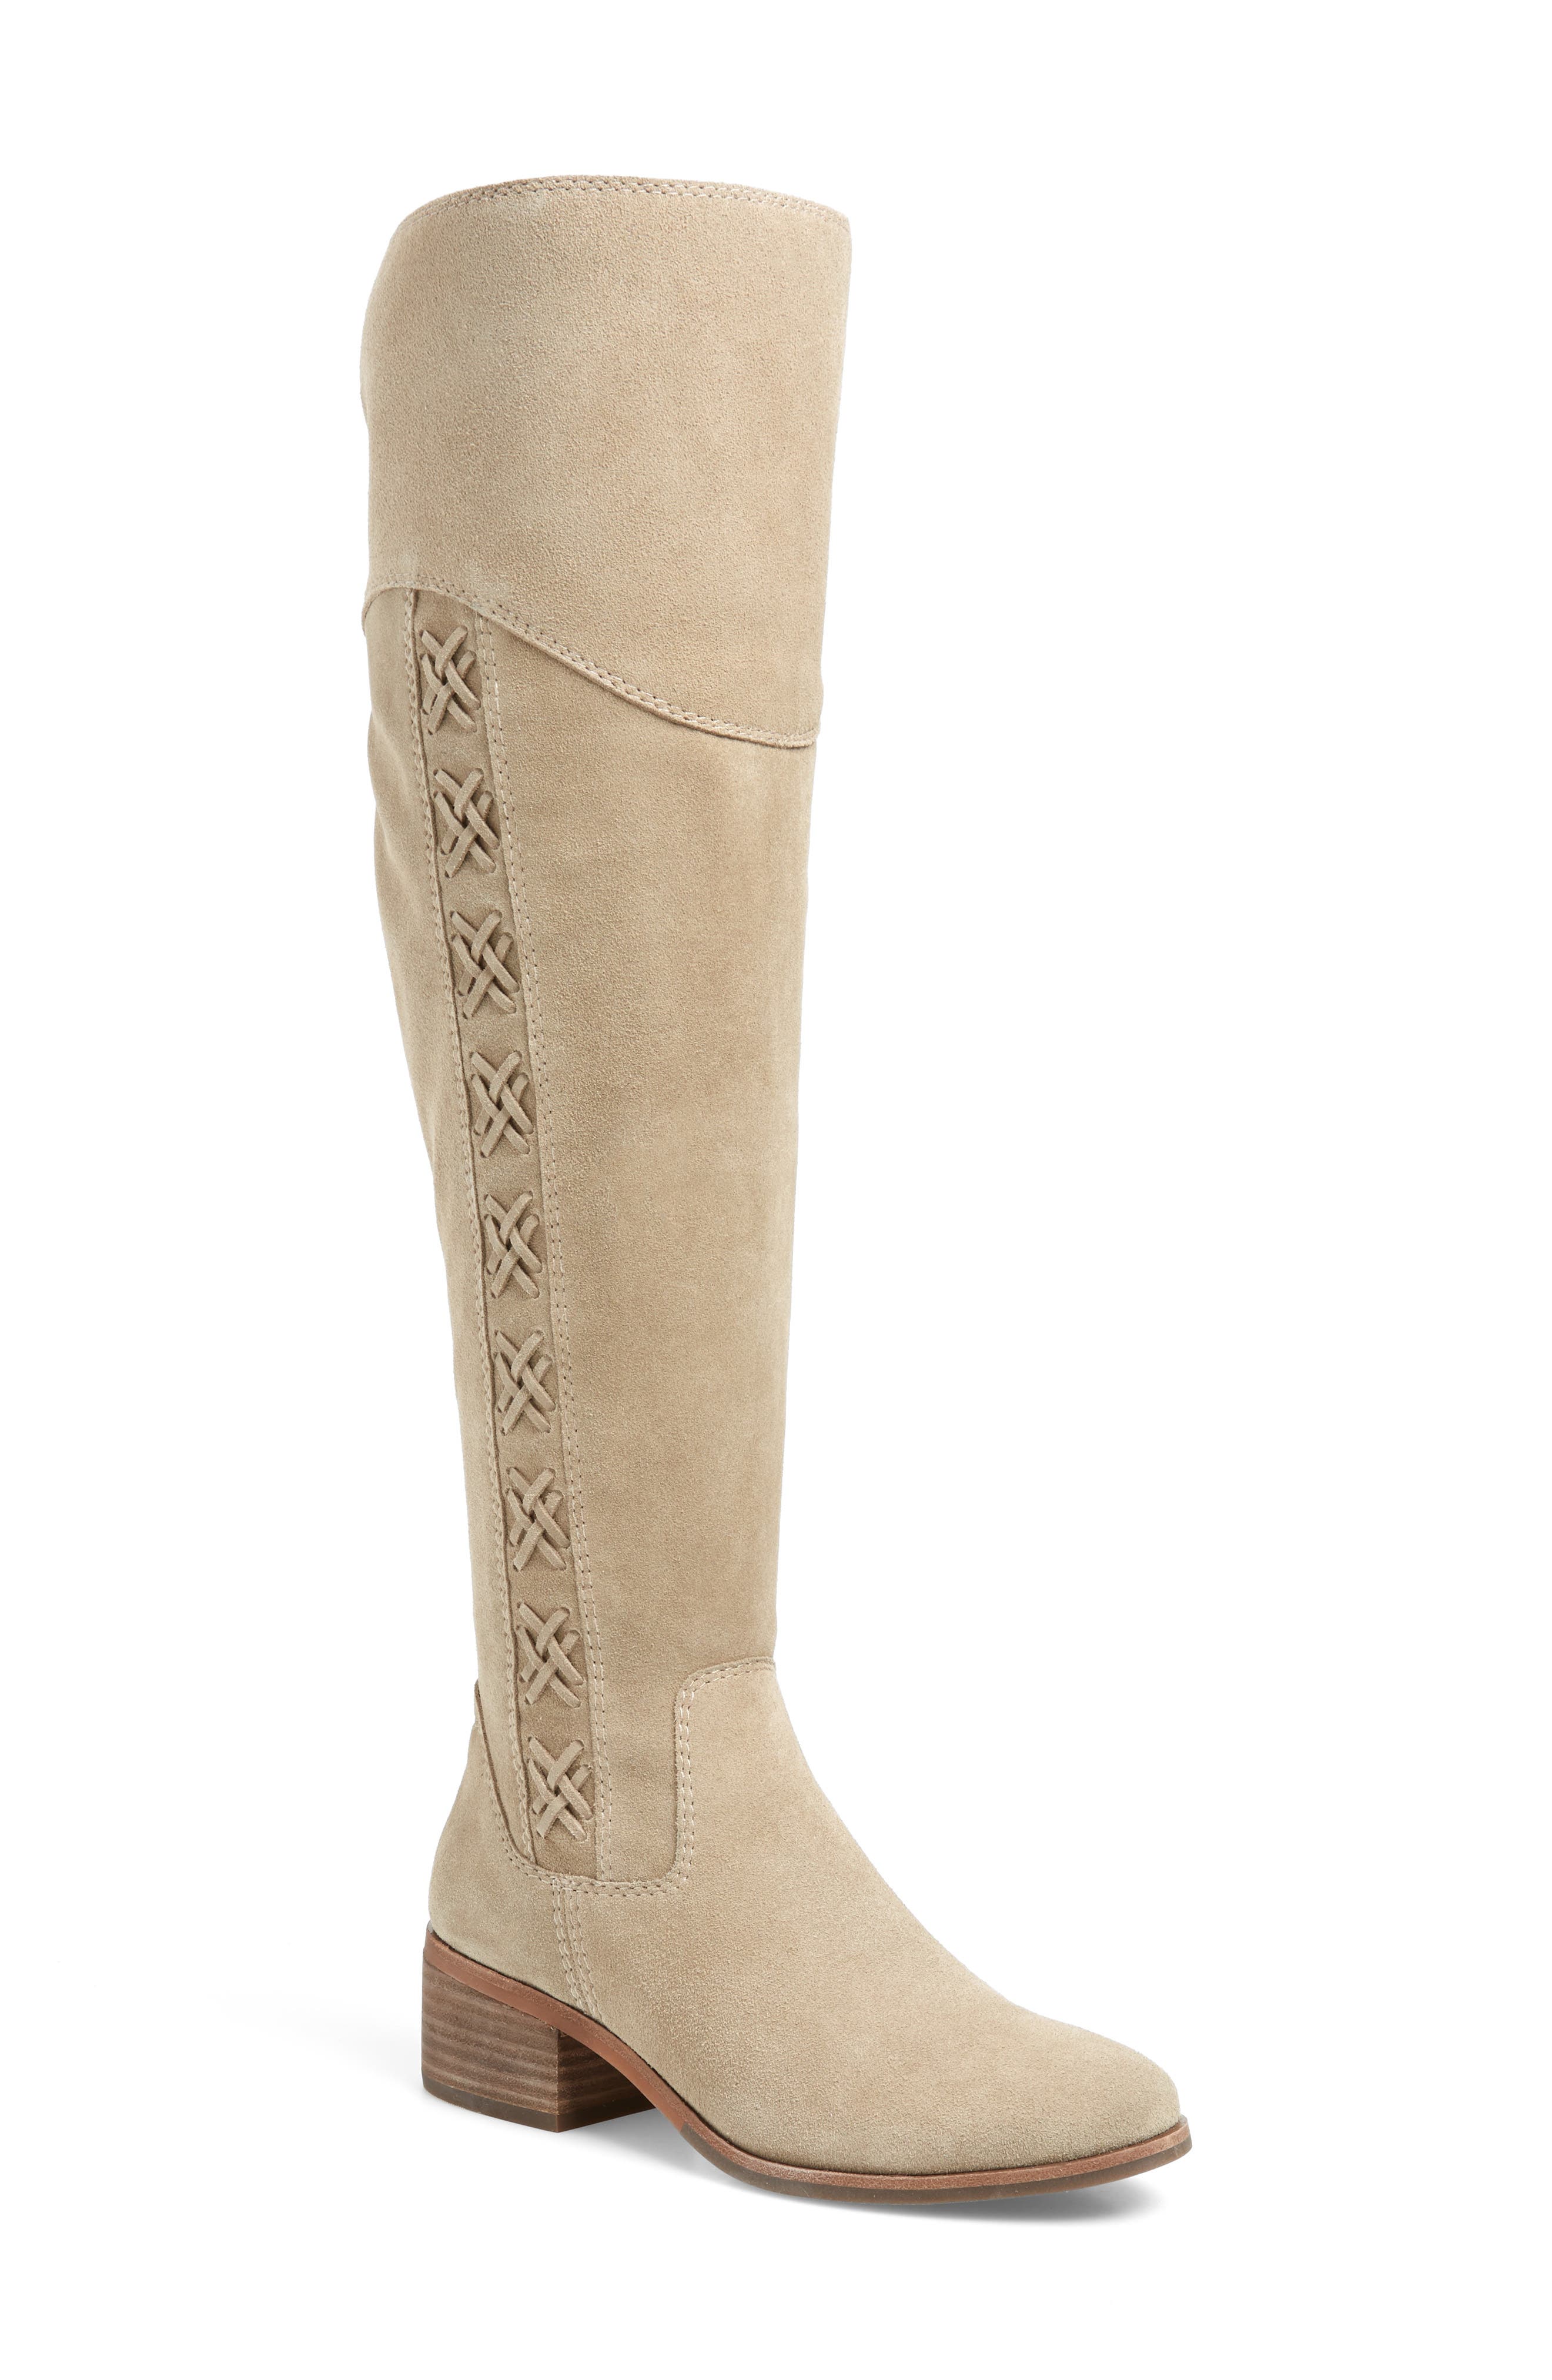 vince camuto secillia perforated boot